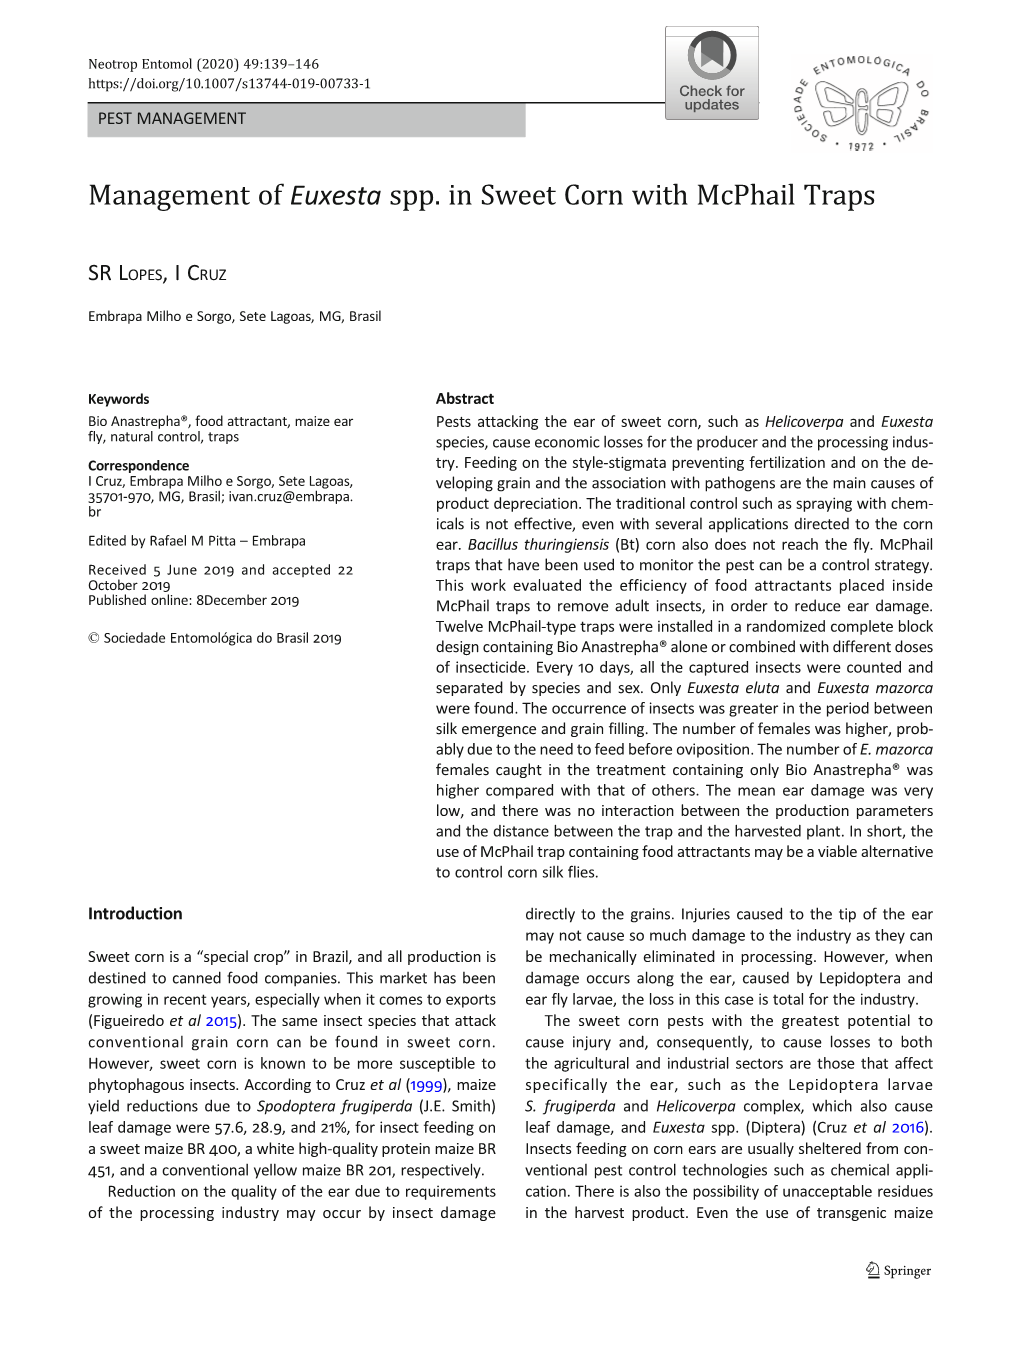 Management of Euxesta Spp. in Sweet Corn with Mcphail Traps